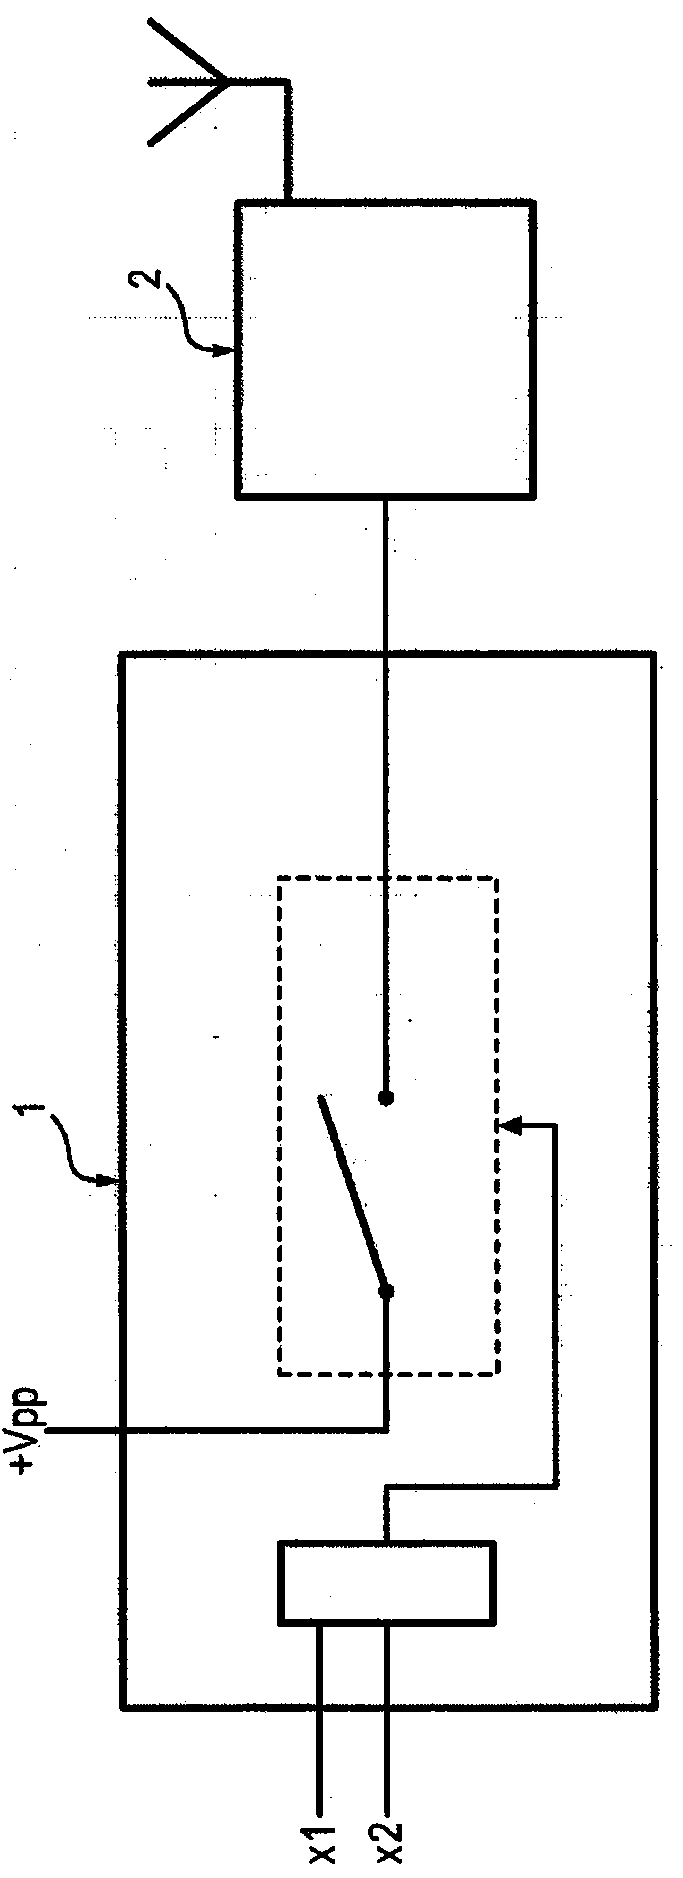 A circuit with transistors and fuses to cut off the power supply